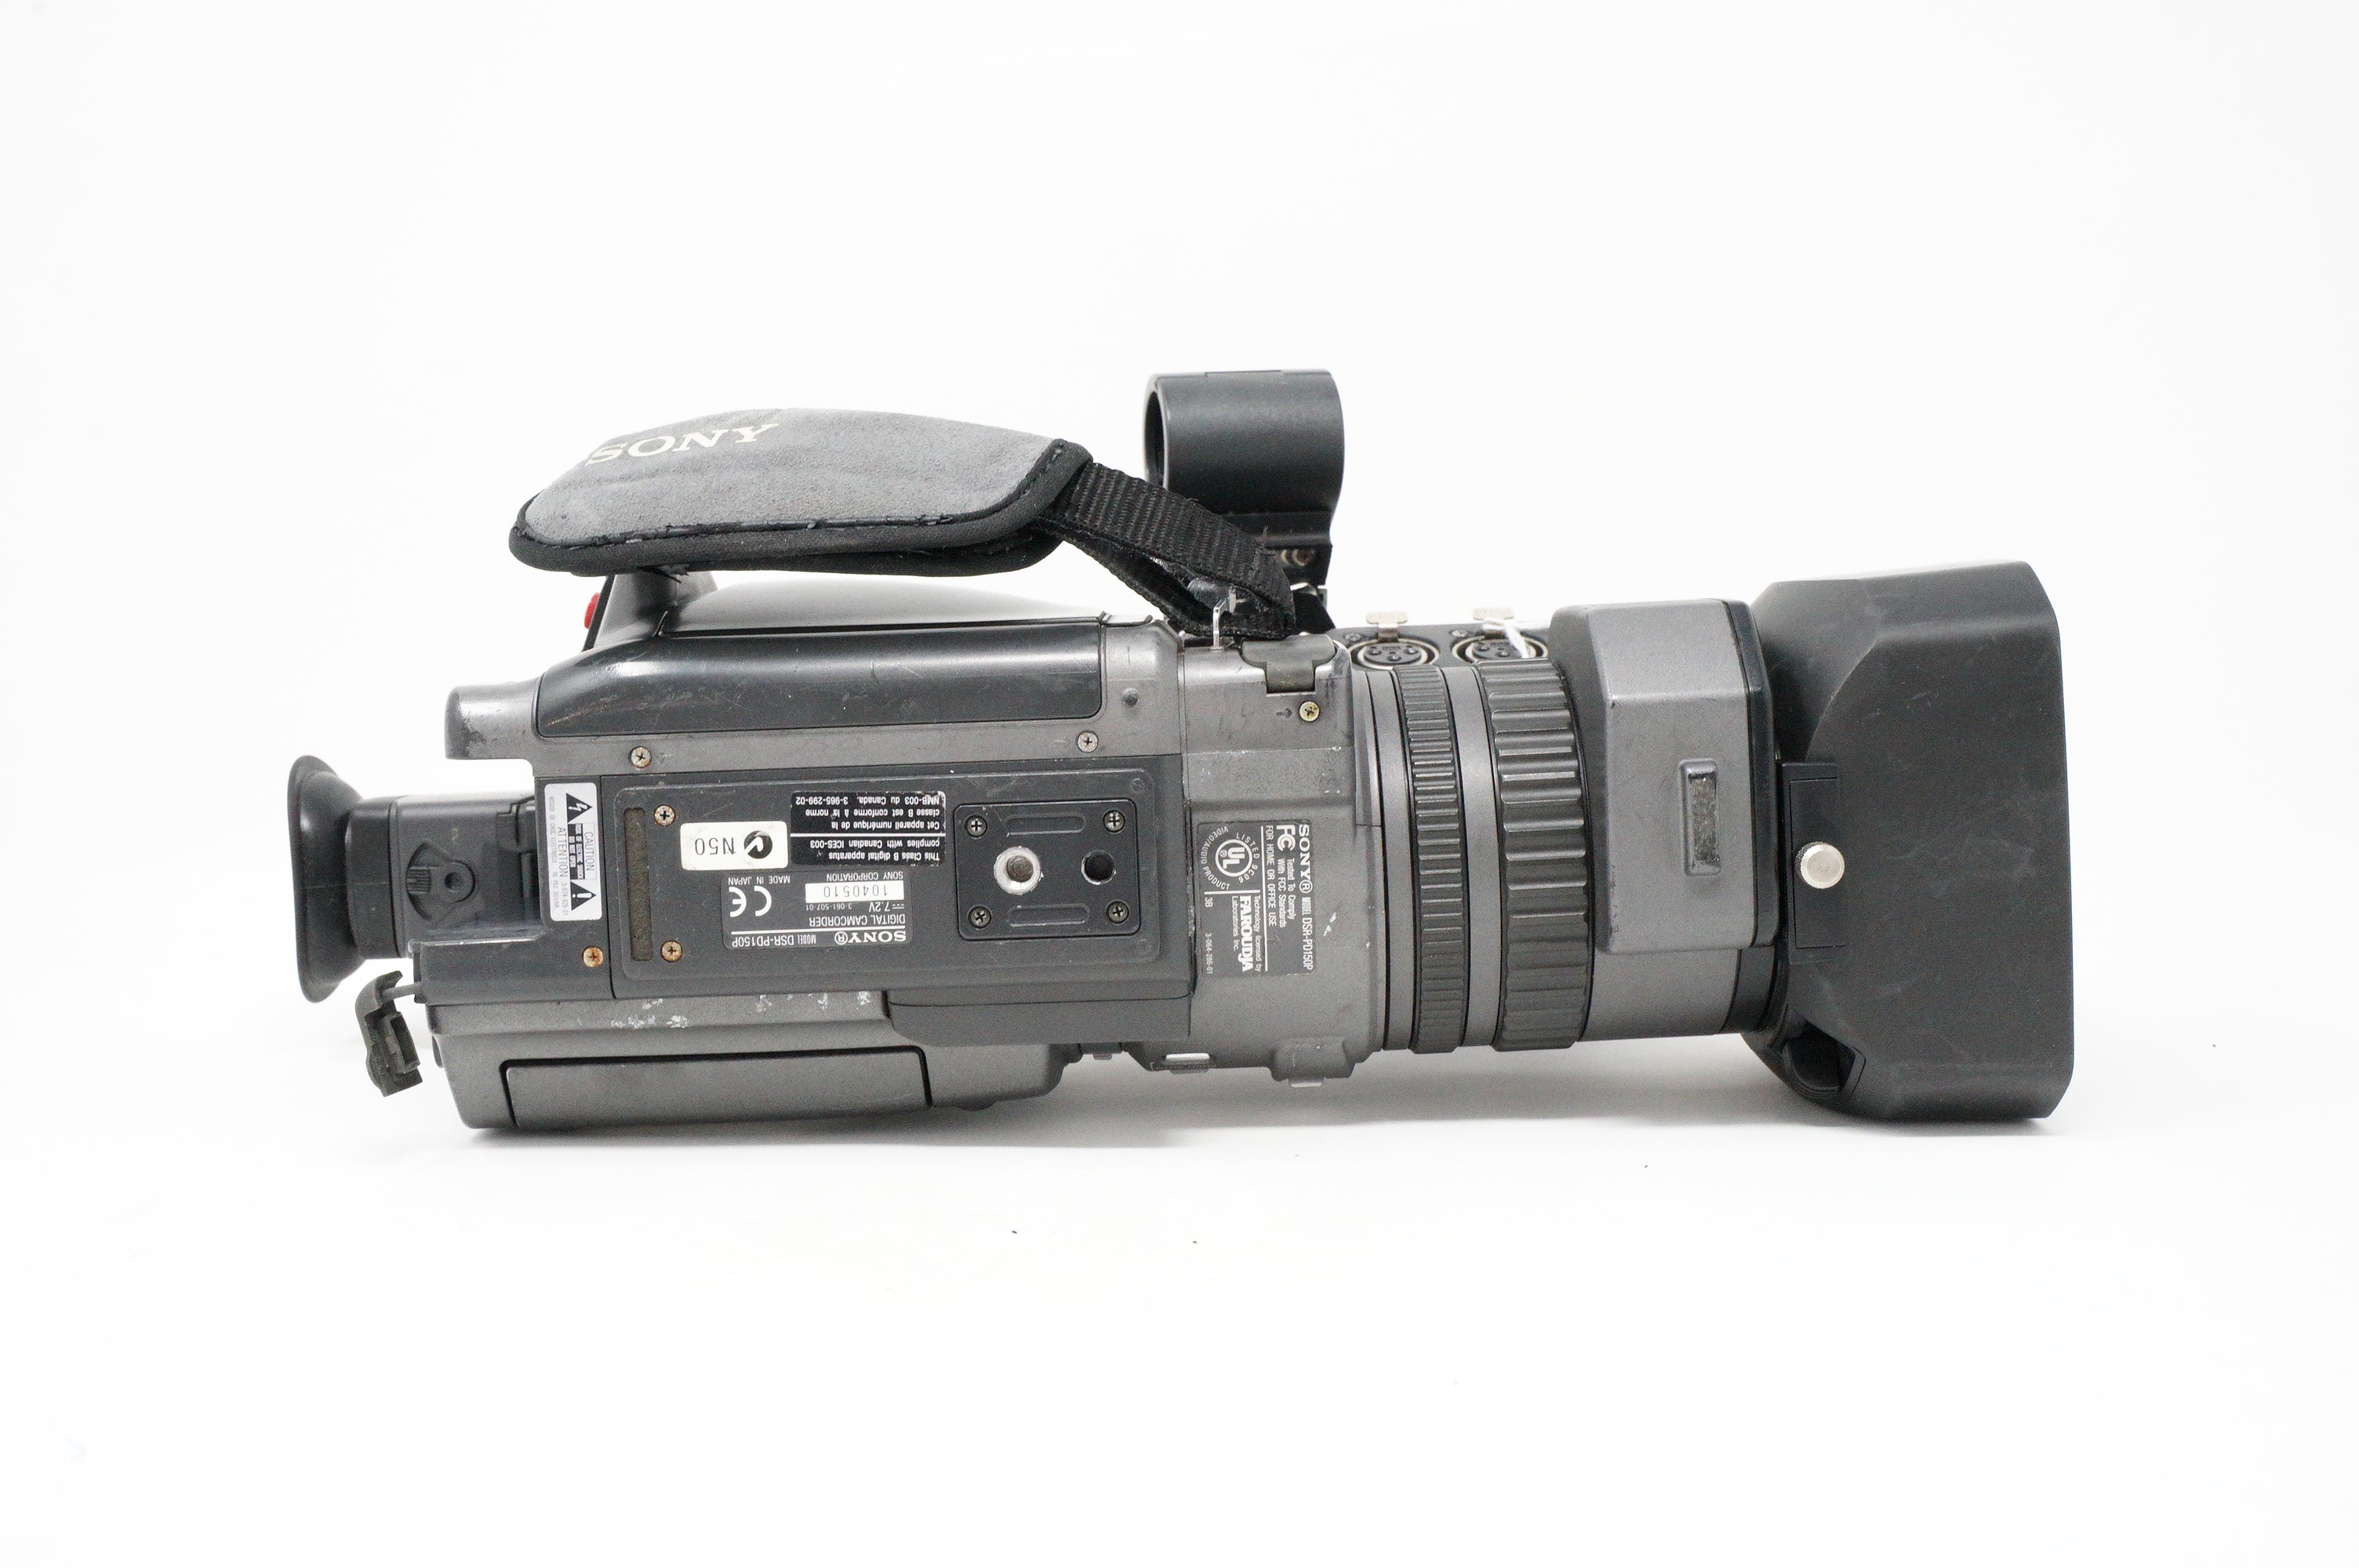 Used Sony DSR-PD150P camcorder + charger (Needs repair)(SH38625)